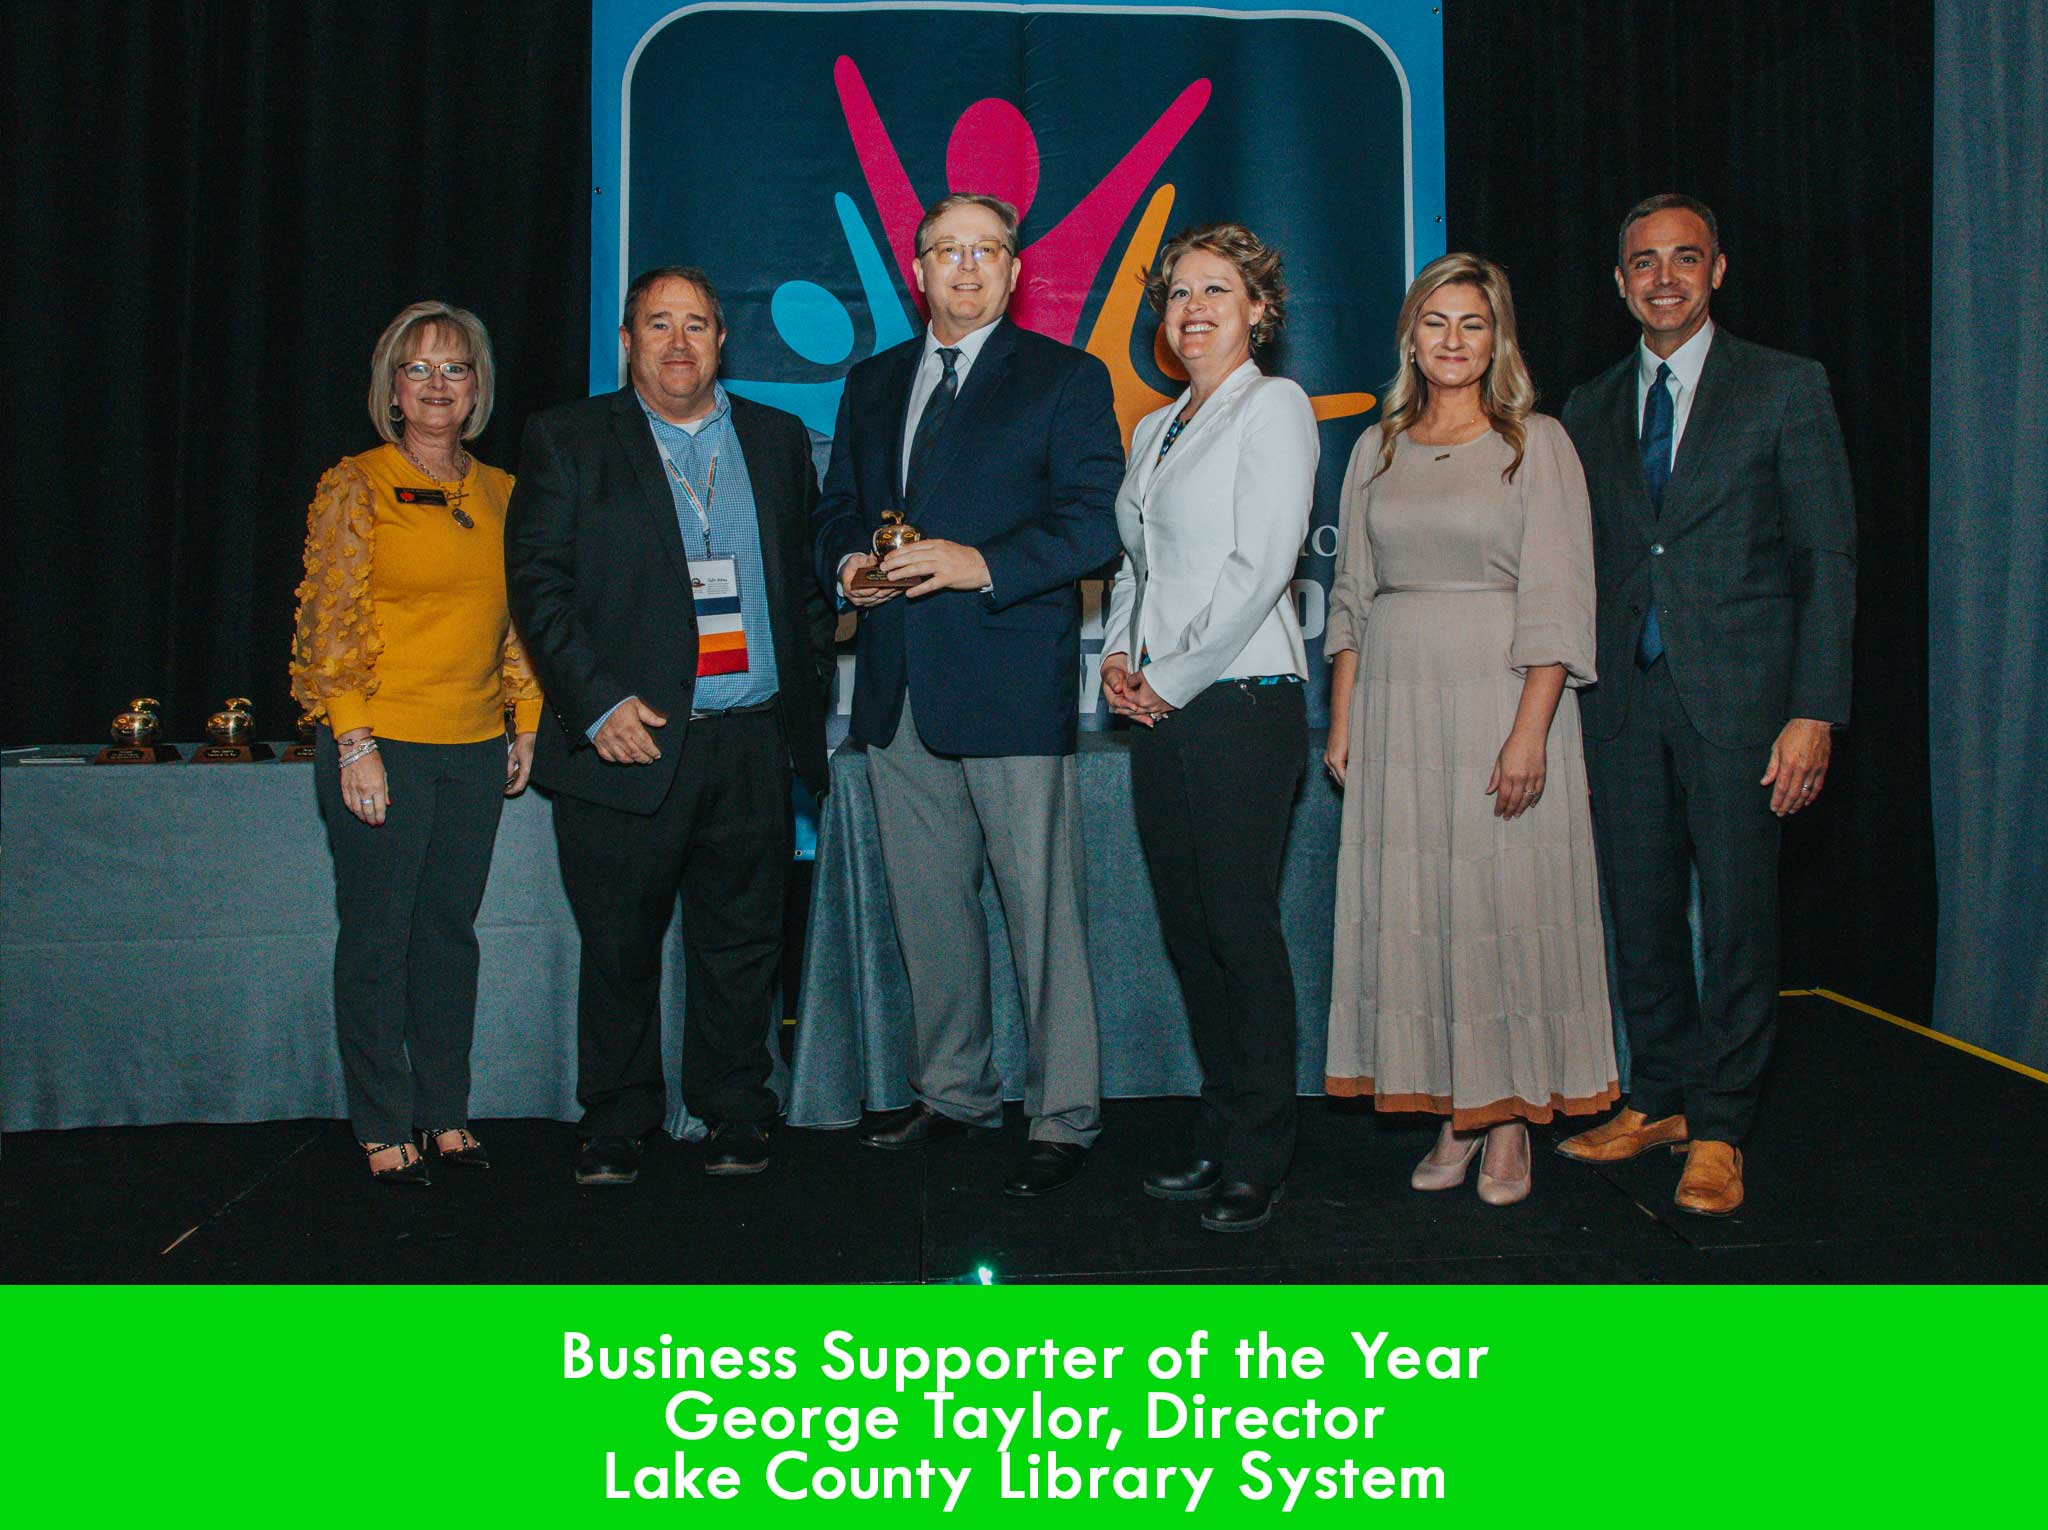 Business Supporter of the Year